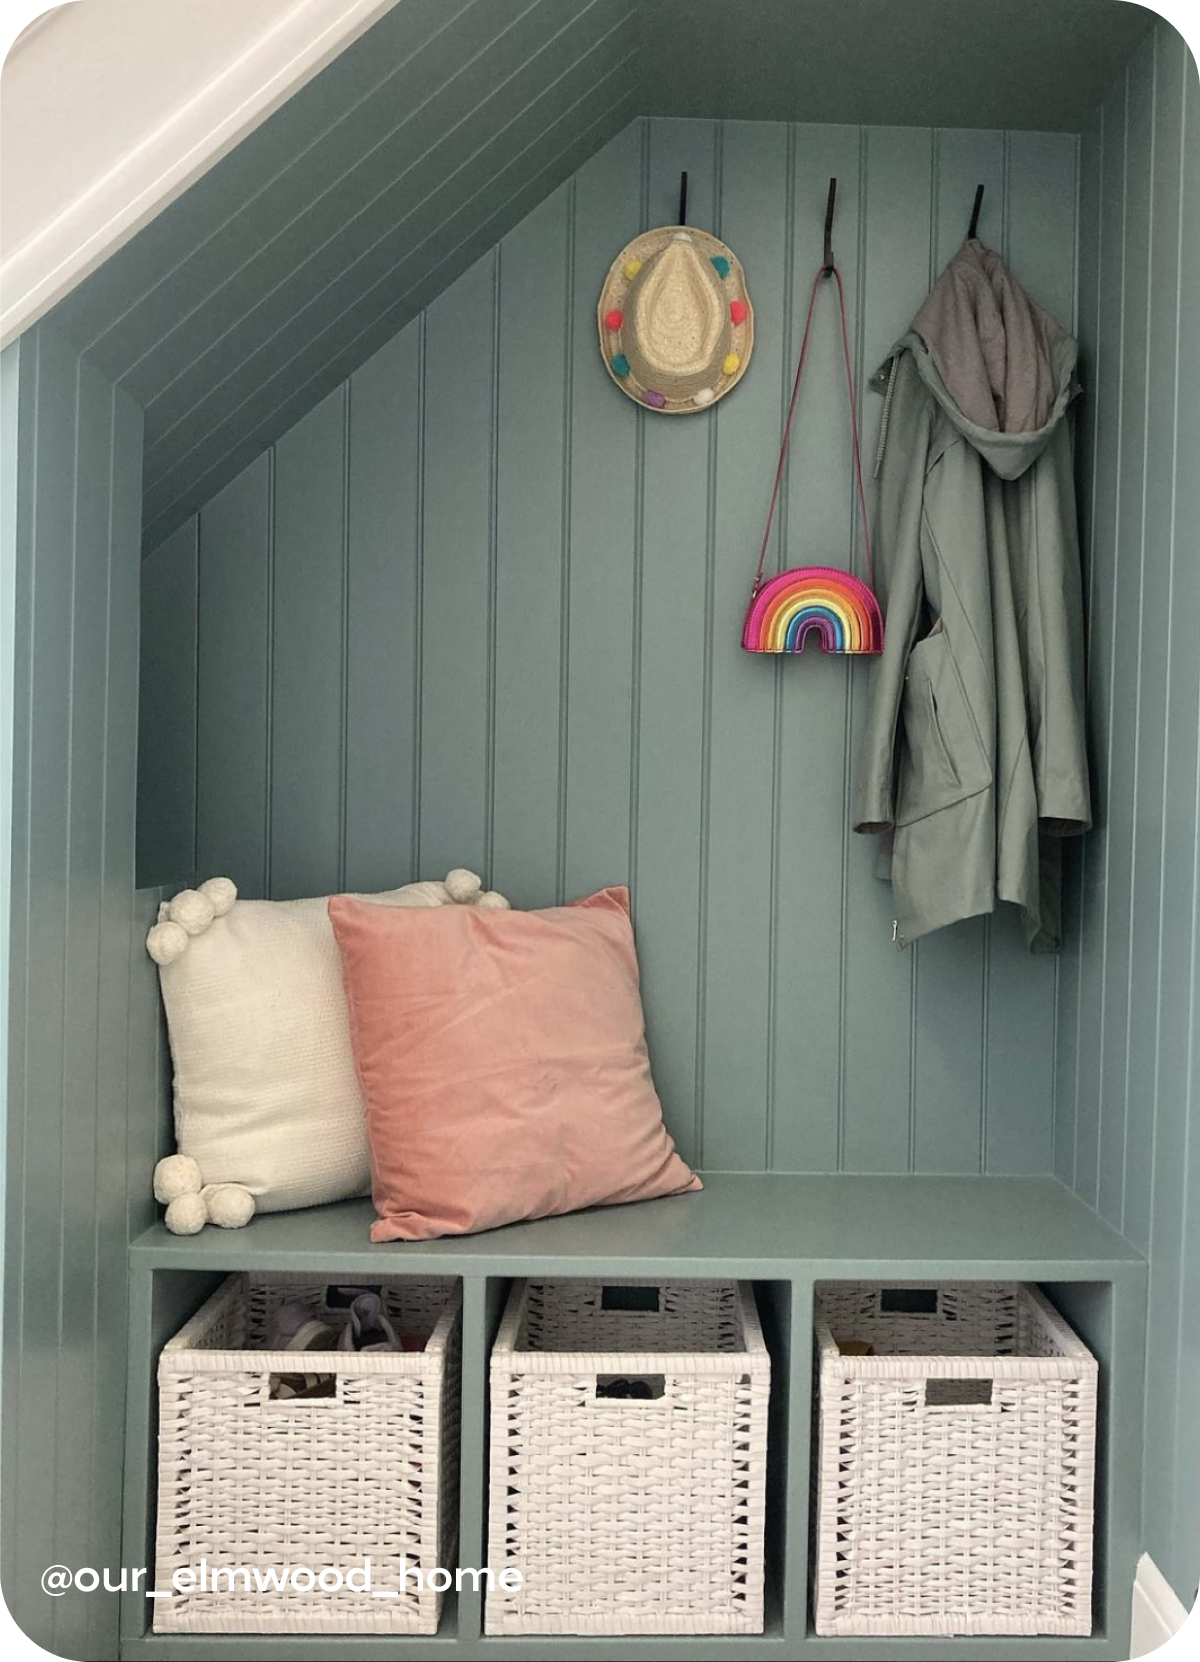 How to Create Under-Stairs Storage - Clever Closet